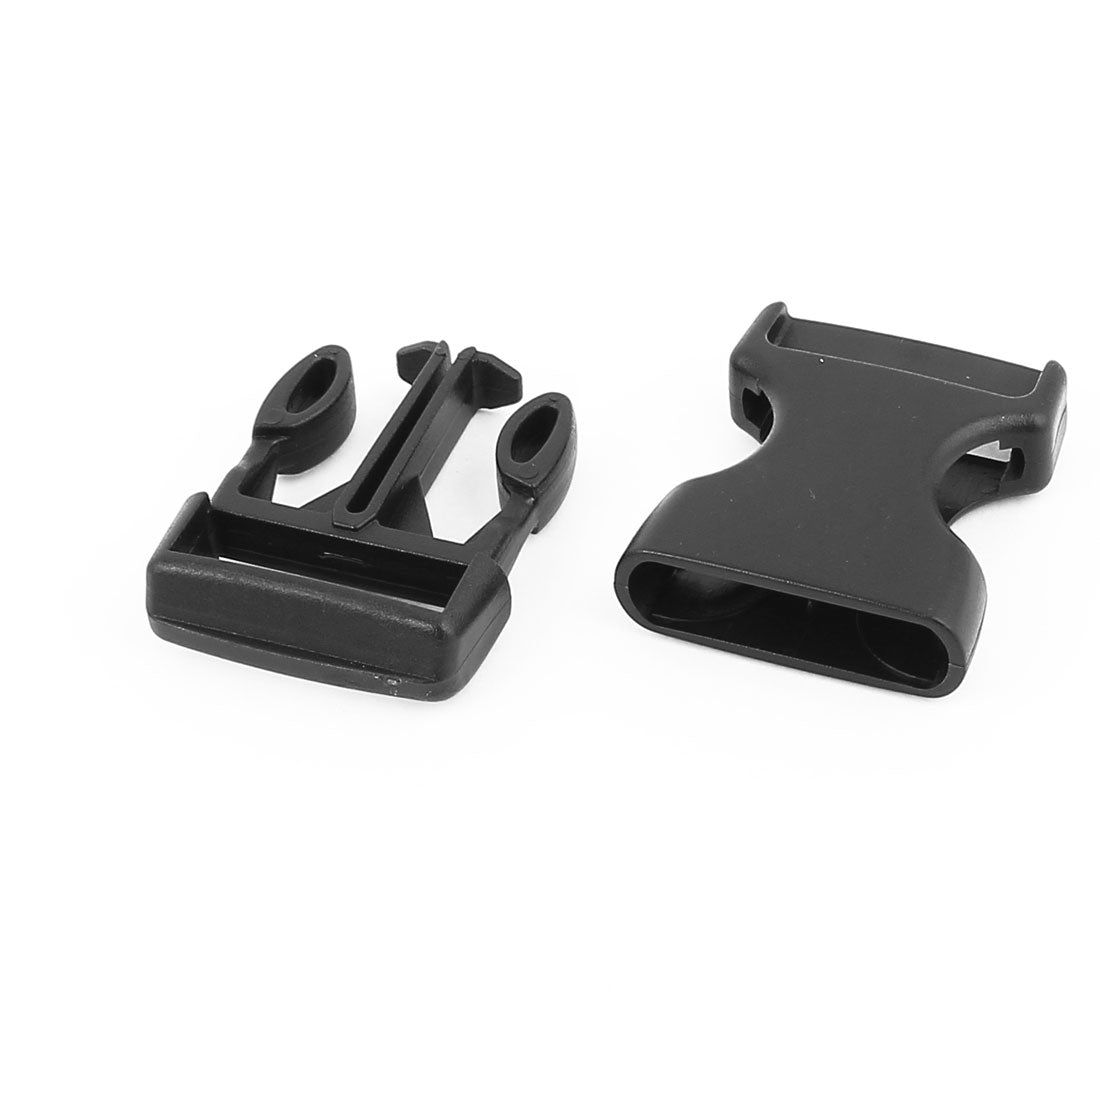 uxcell Uxcell 4pcs Black Plastic Curved Side Quick Release Buckles Snap Clip for 25mm Webbing Band